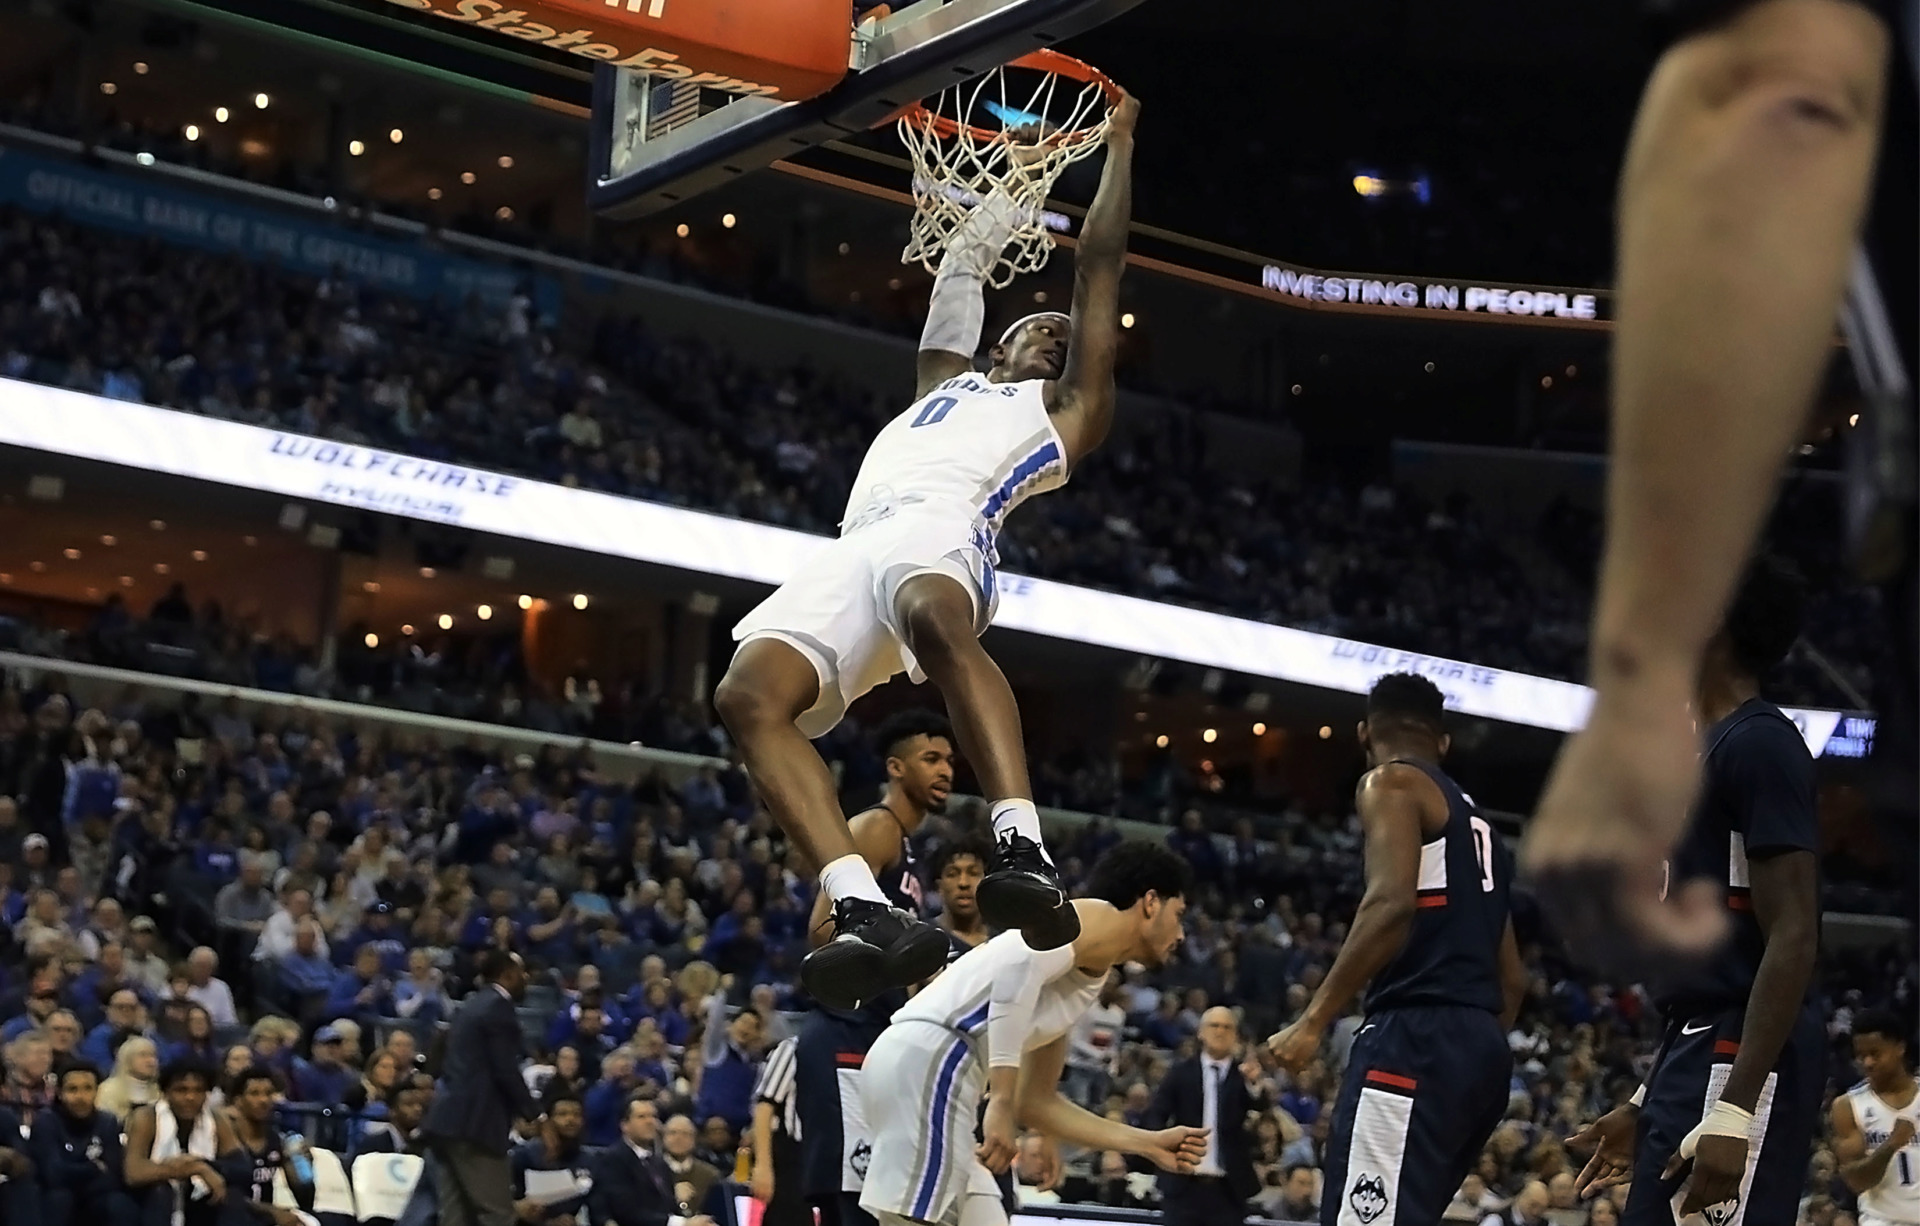 <strong>Kyvon Davenport brings the fans at FedExForum to their feet with a dunk in the first half against the University of Connecticut Huskies on Sunday, Feb. 10.</strong> (Patrick Lantrip/Daily Memphian)